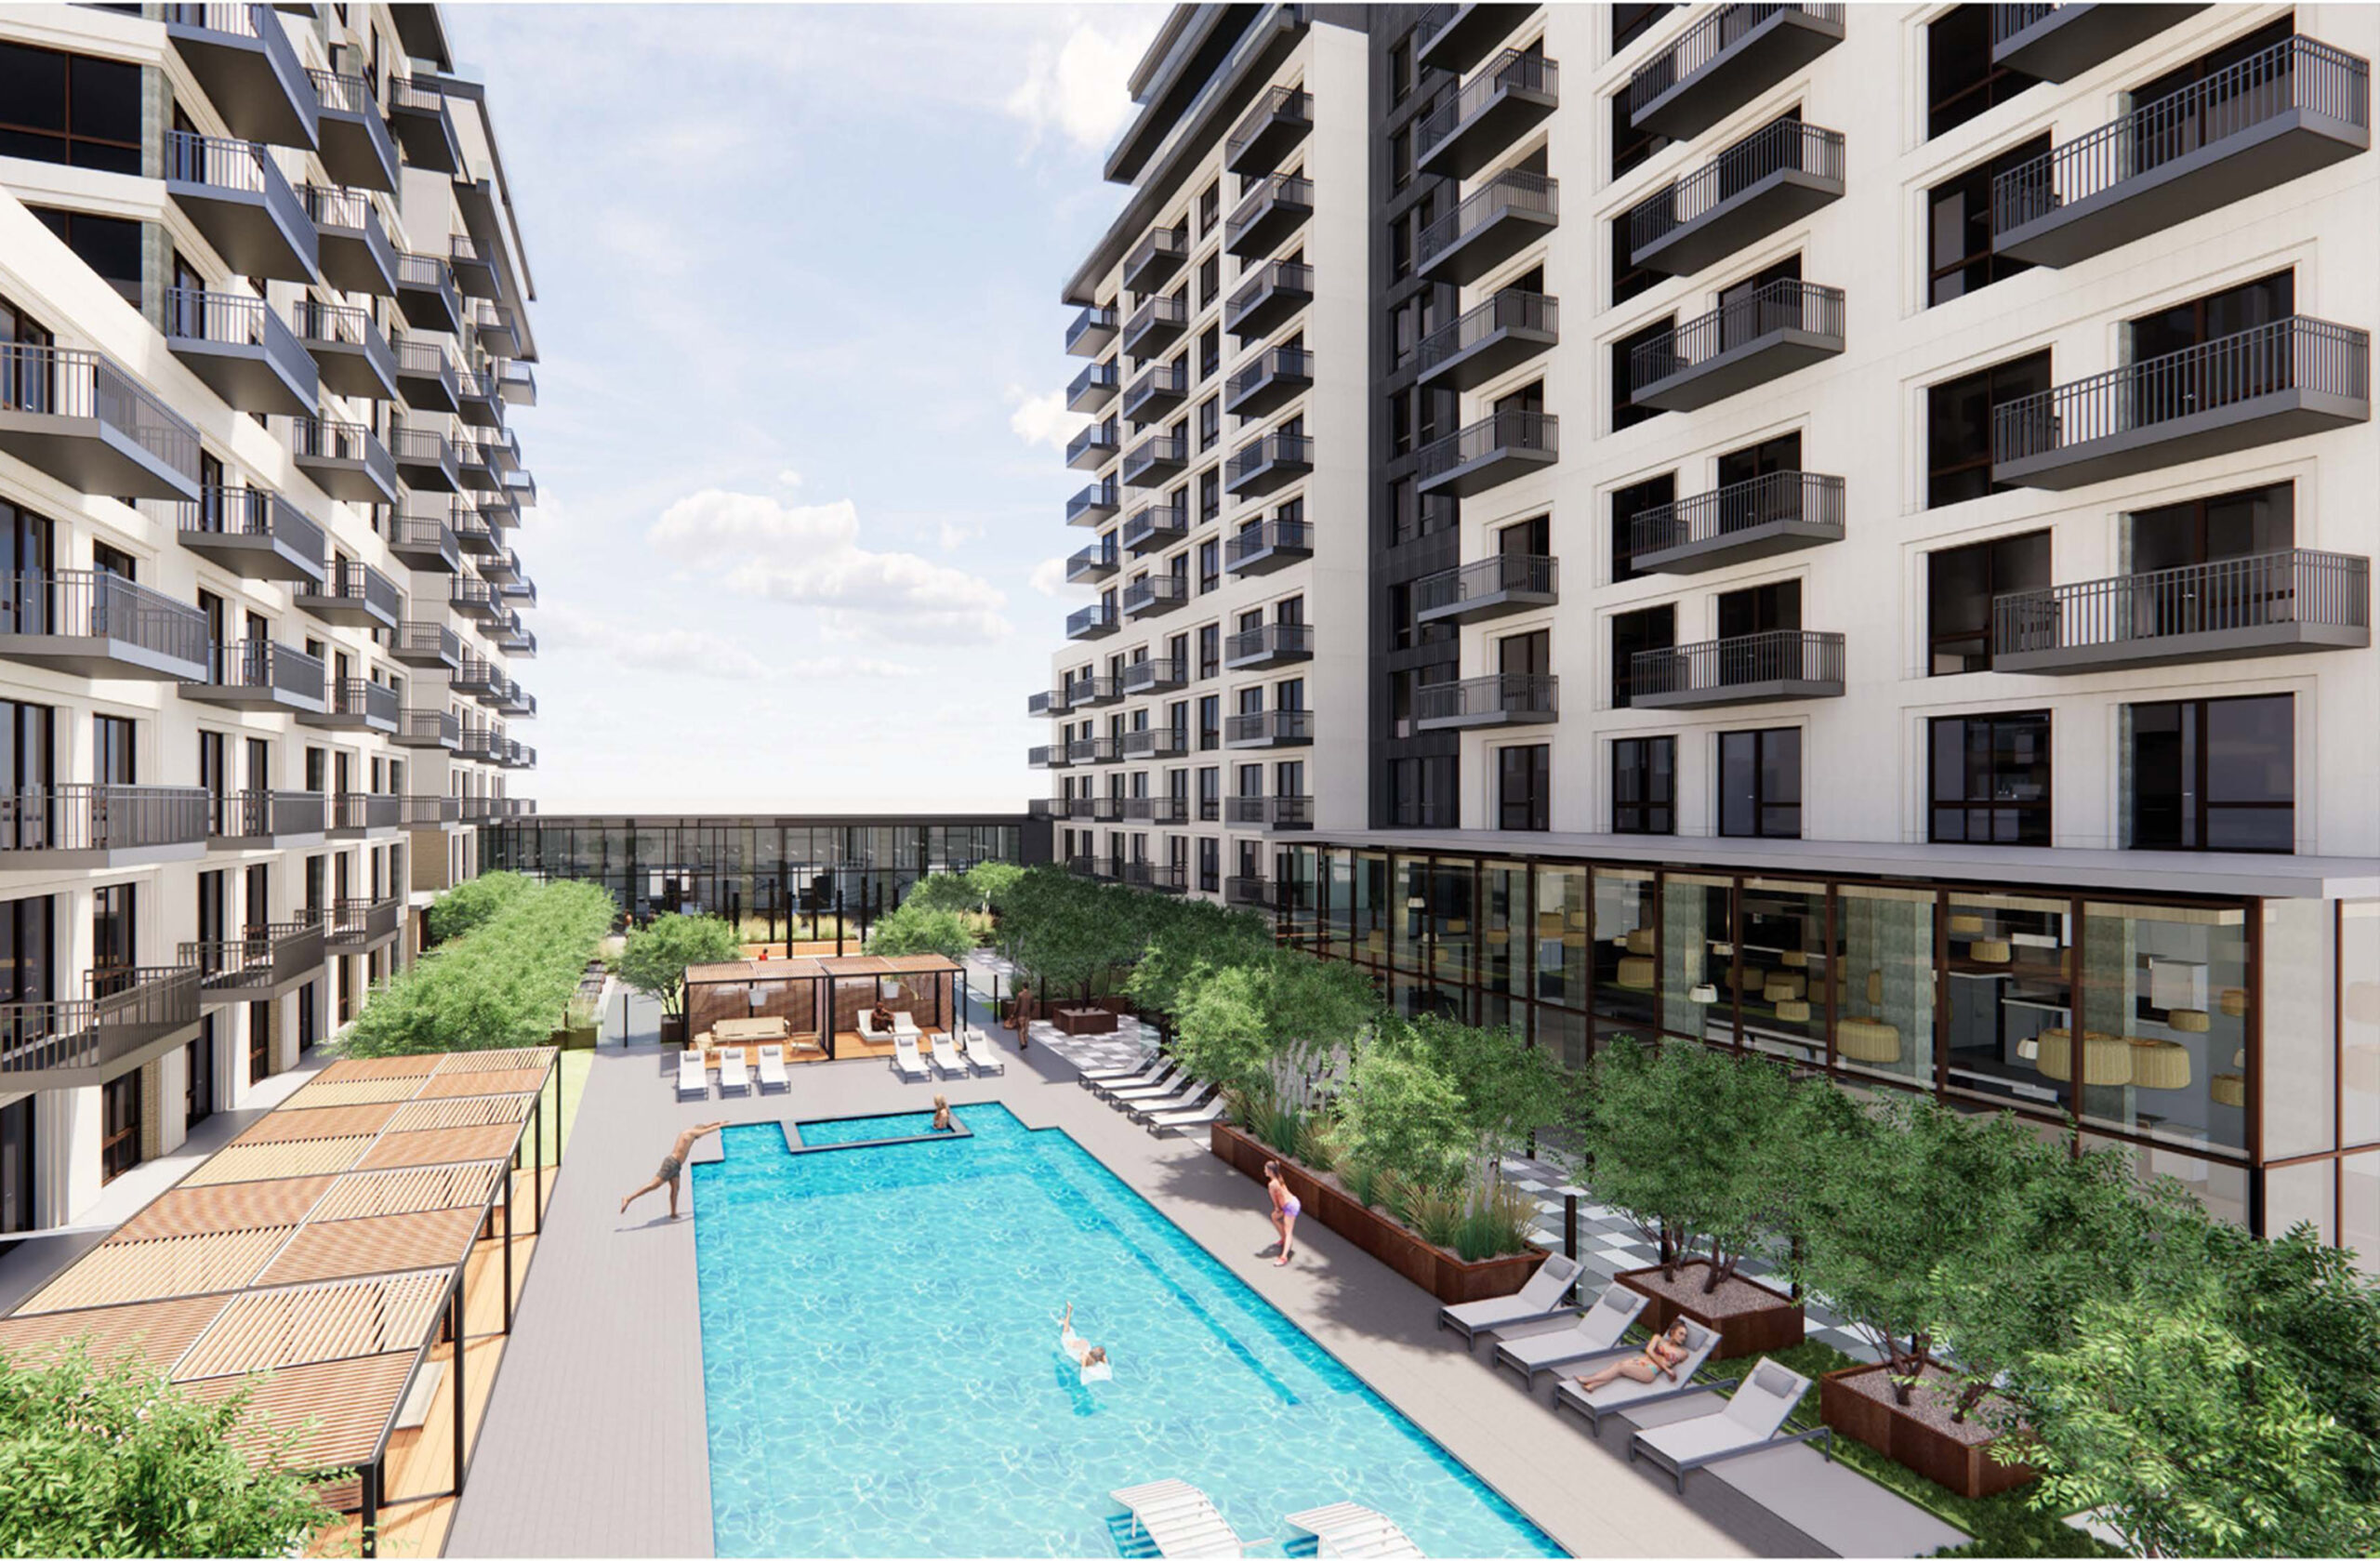 Modern apartment complex with south-facing pool area flanked by symmetrical buildings. Wooden deck with lounge chairs, greenery, and communal spaces promote urban outdoor living. Sunlight enhances the inviting ambiance.